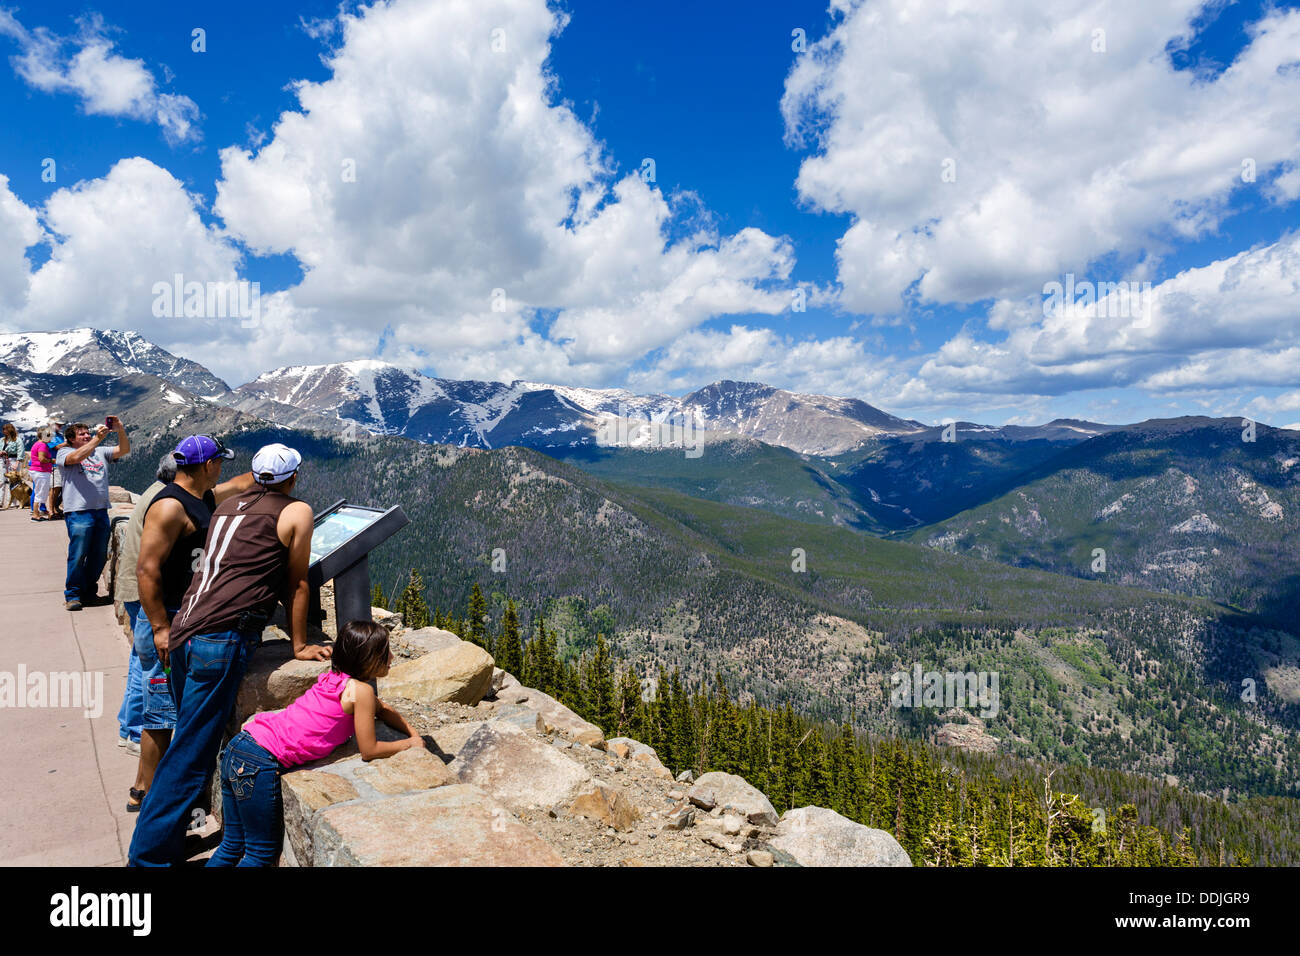 View from the Rainbow Curve Overlook at 3280m, Trail Ridge Road, Rocky Mountain National Park, Colorado, USA Stock Photo